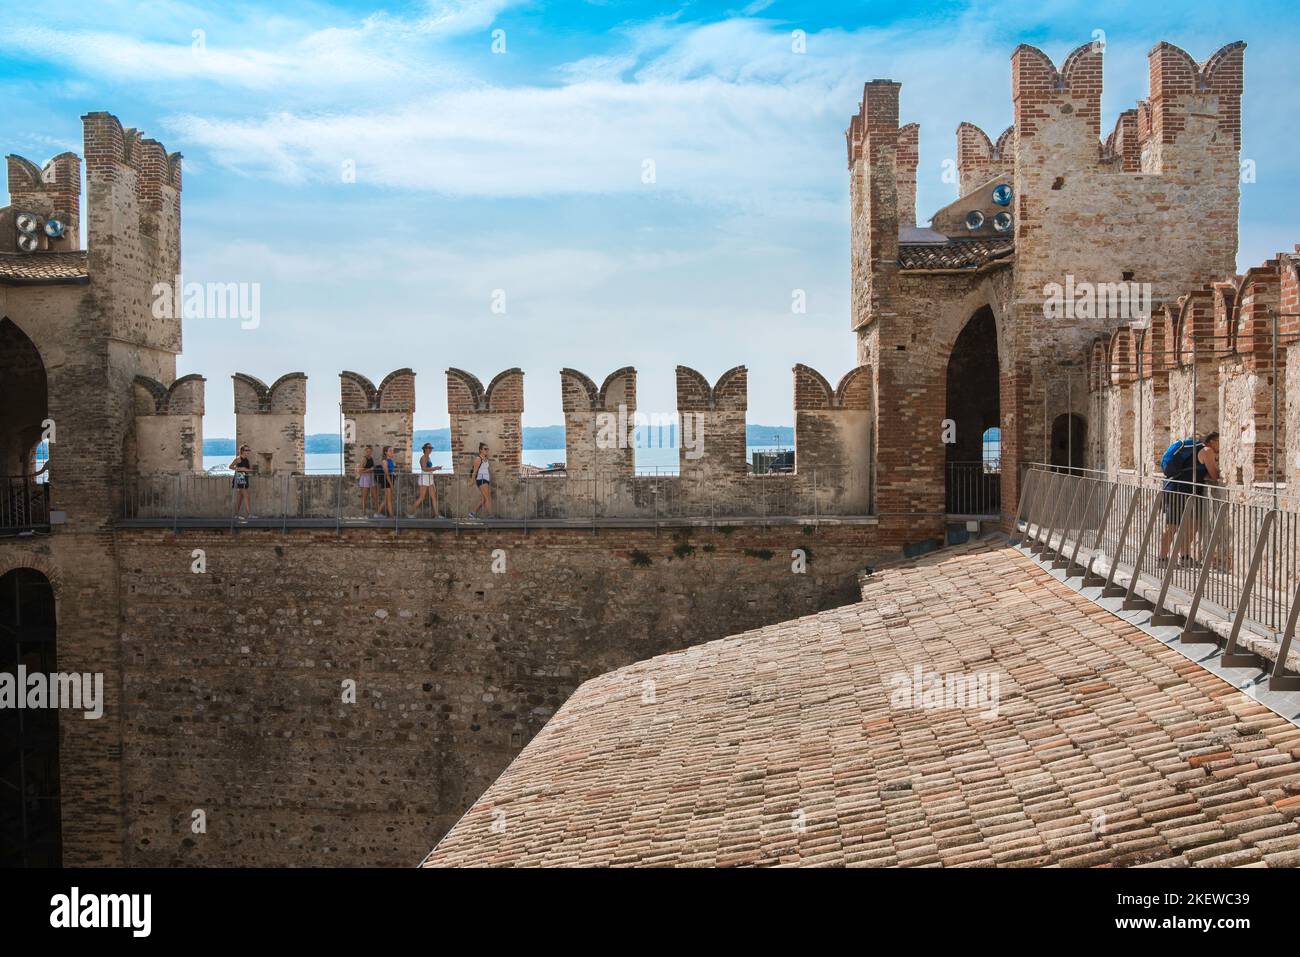 Scaligero Castle Sirmione, view in summer of female tourists exploring the battlements of the west wall of the medieval Scaligero Castle, Lake Garda Stock Photo